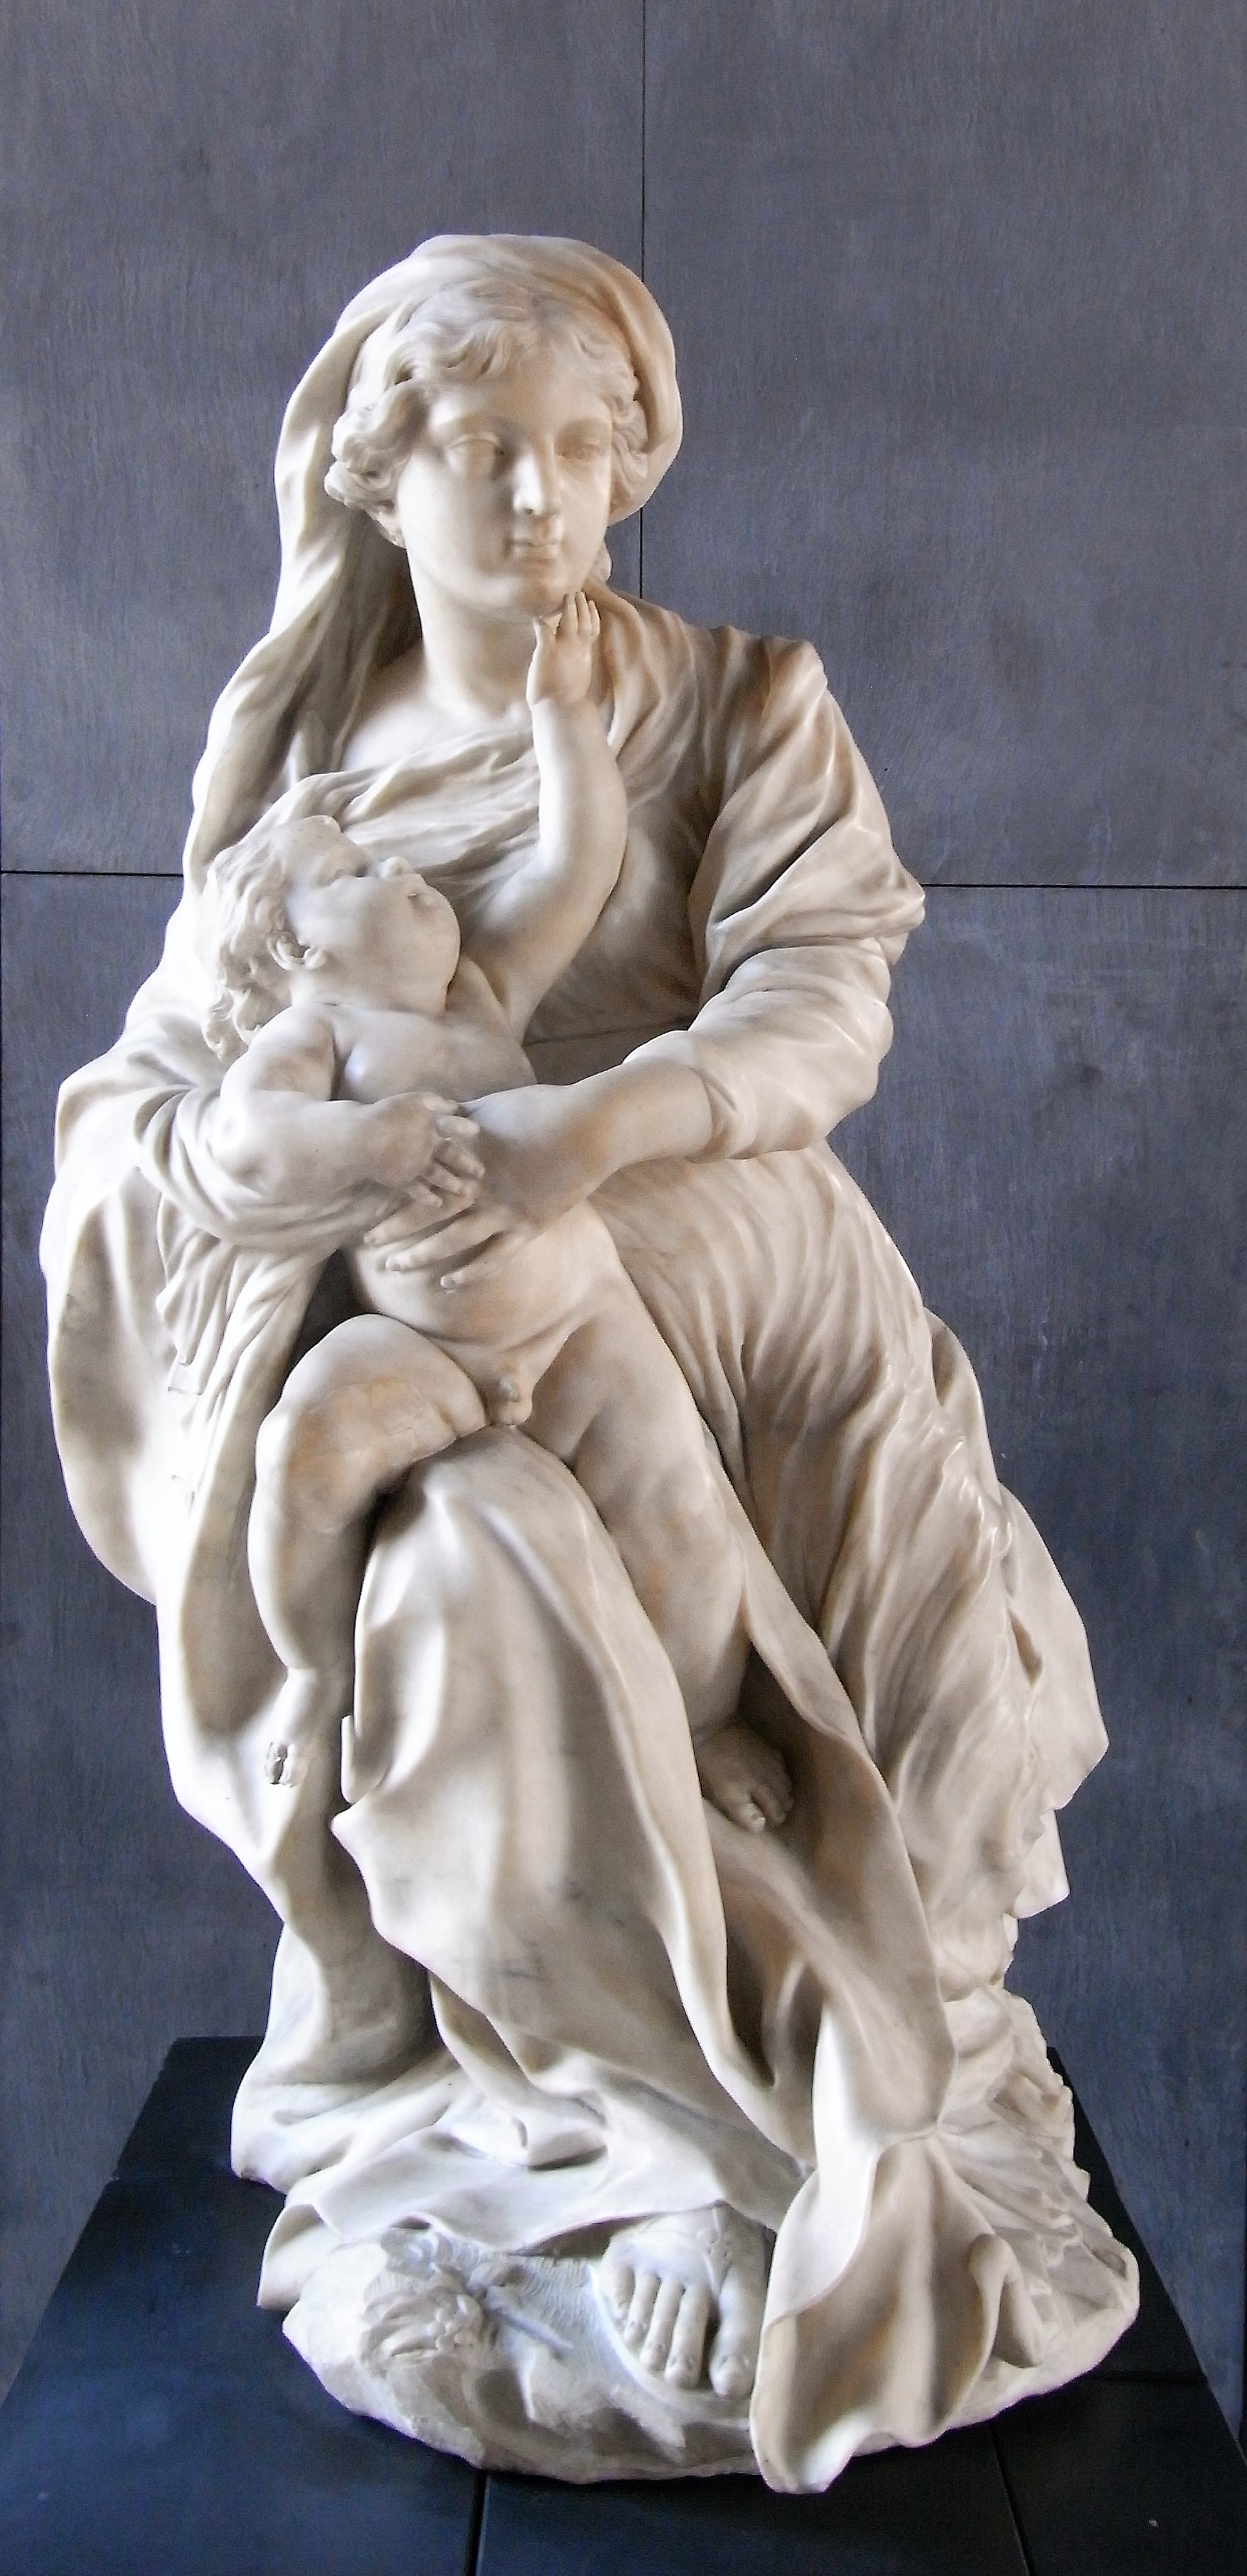 Pierre Puget "The Virgin and Child"